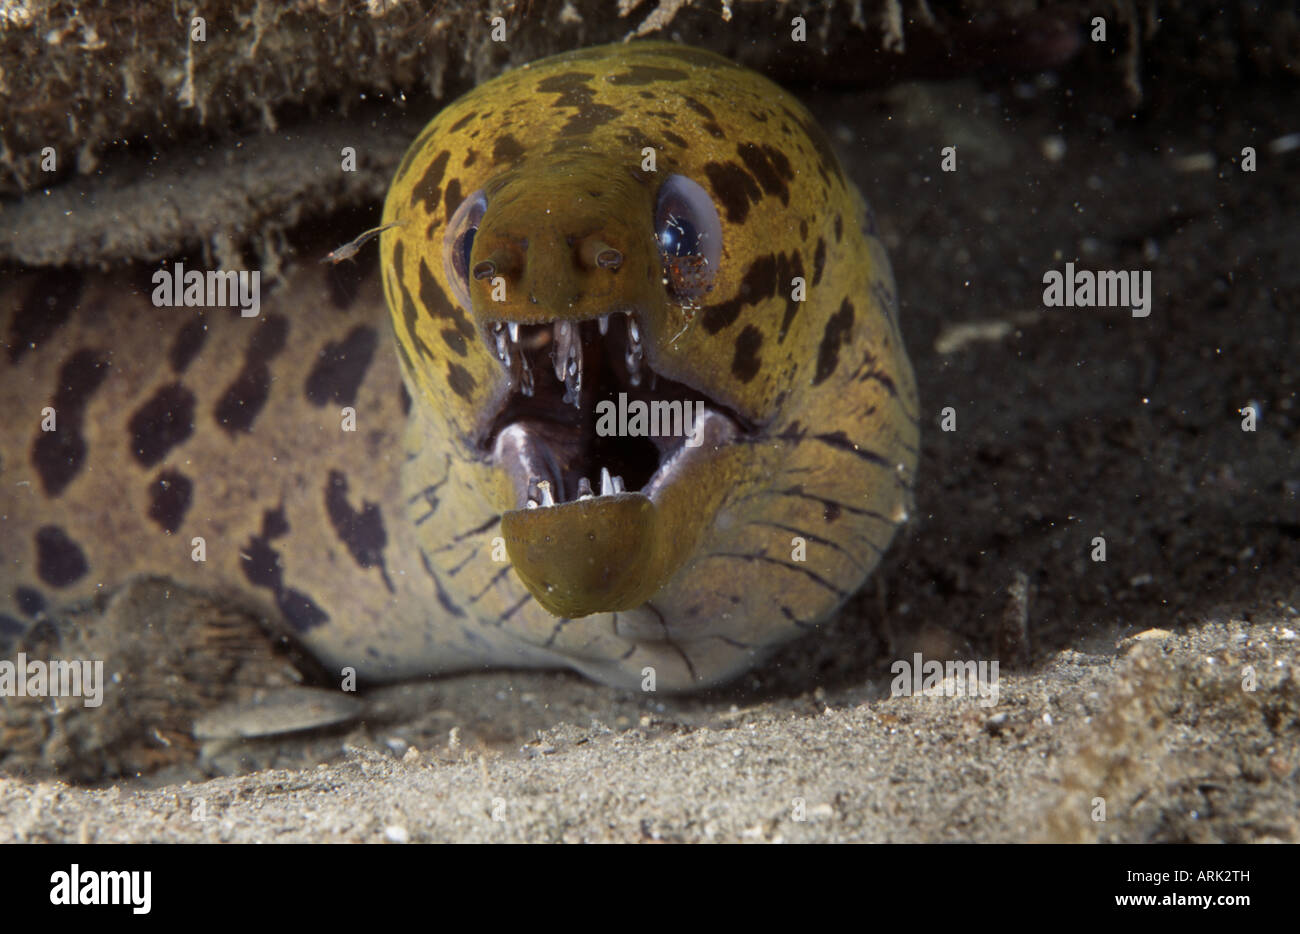 Close-up of a Spotted Moray eel (Gymnothorax fimbriatus) Stock Photo